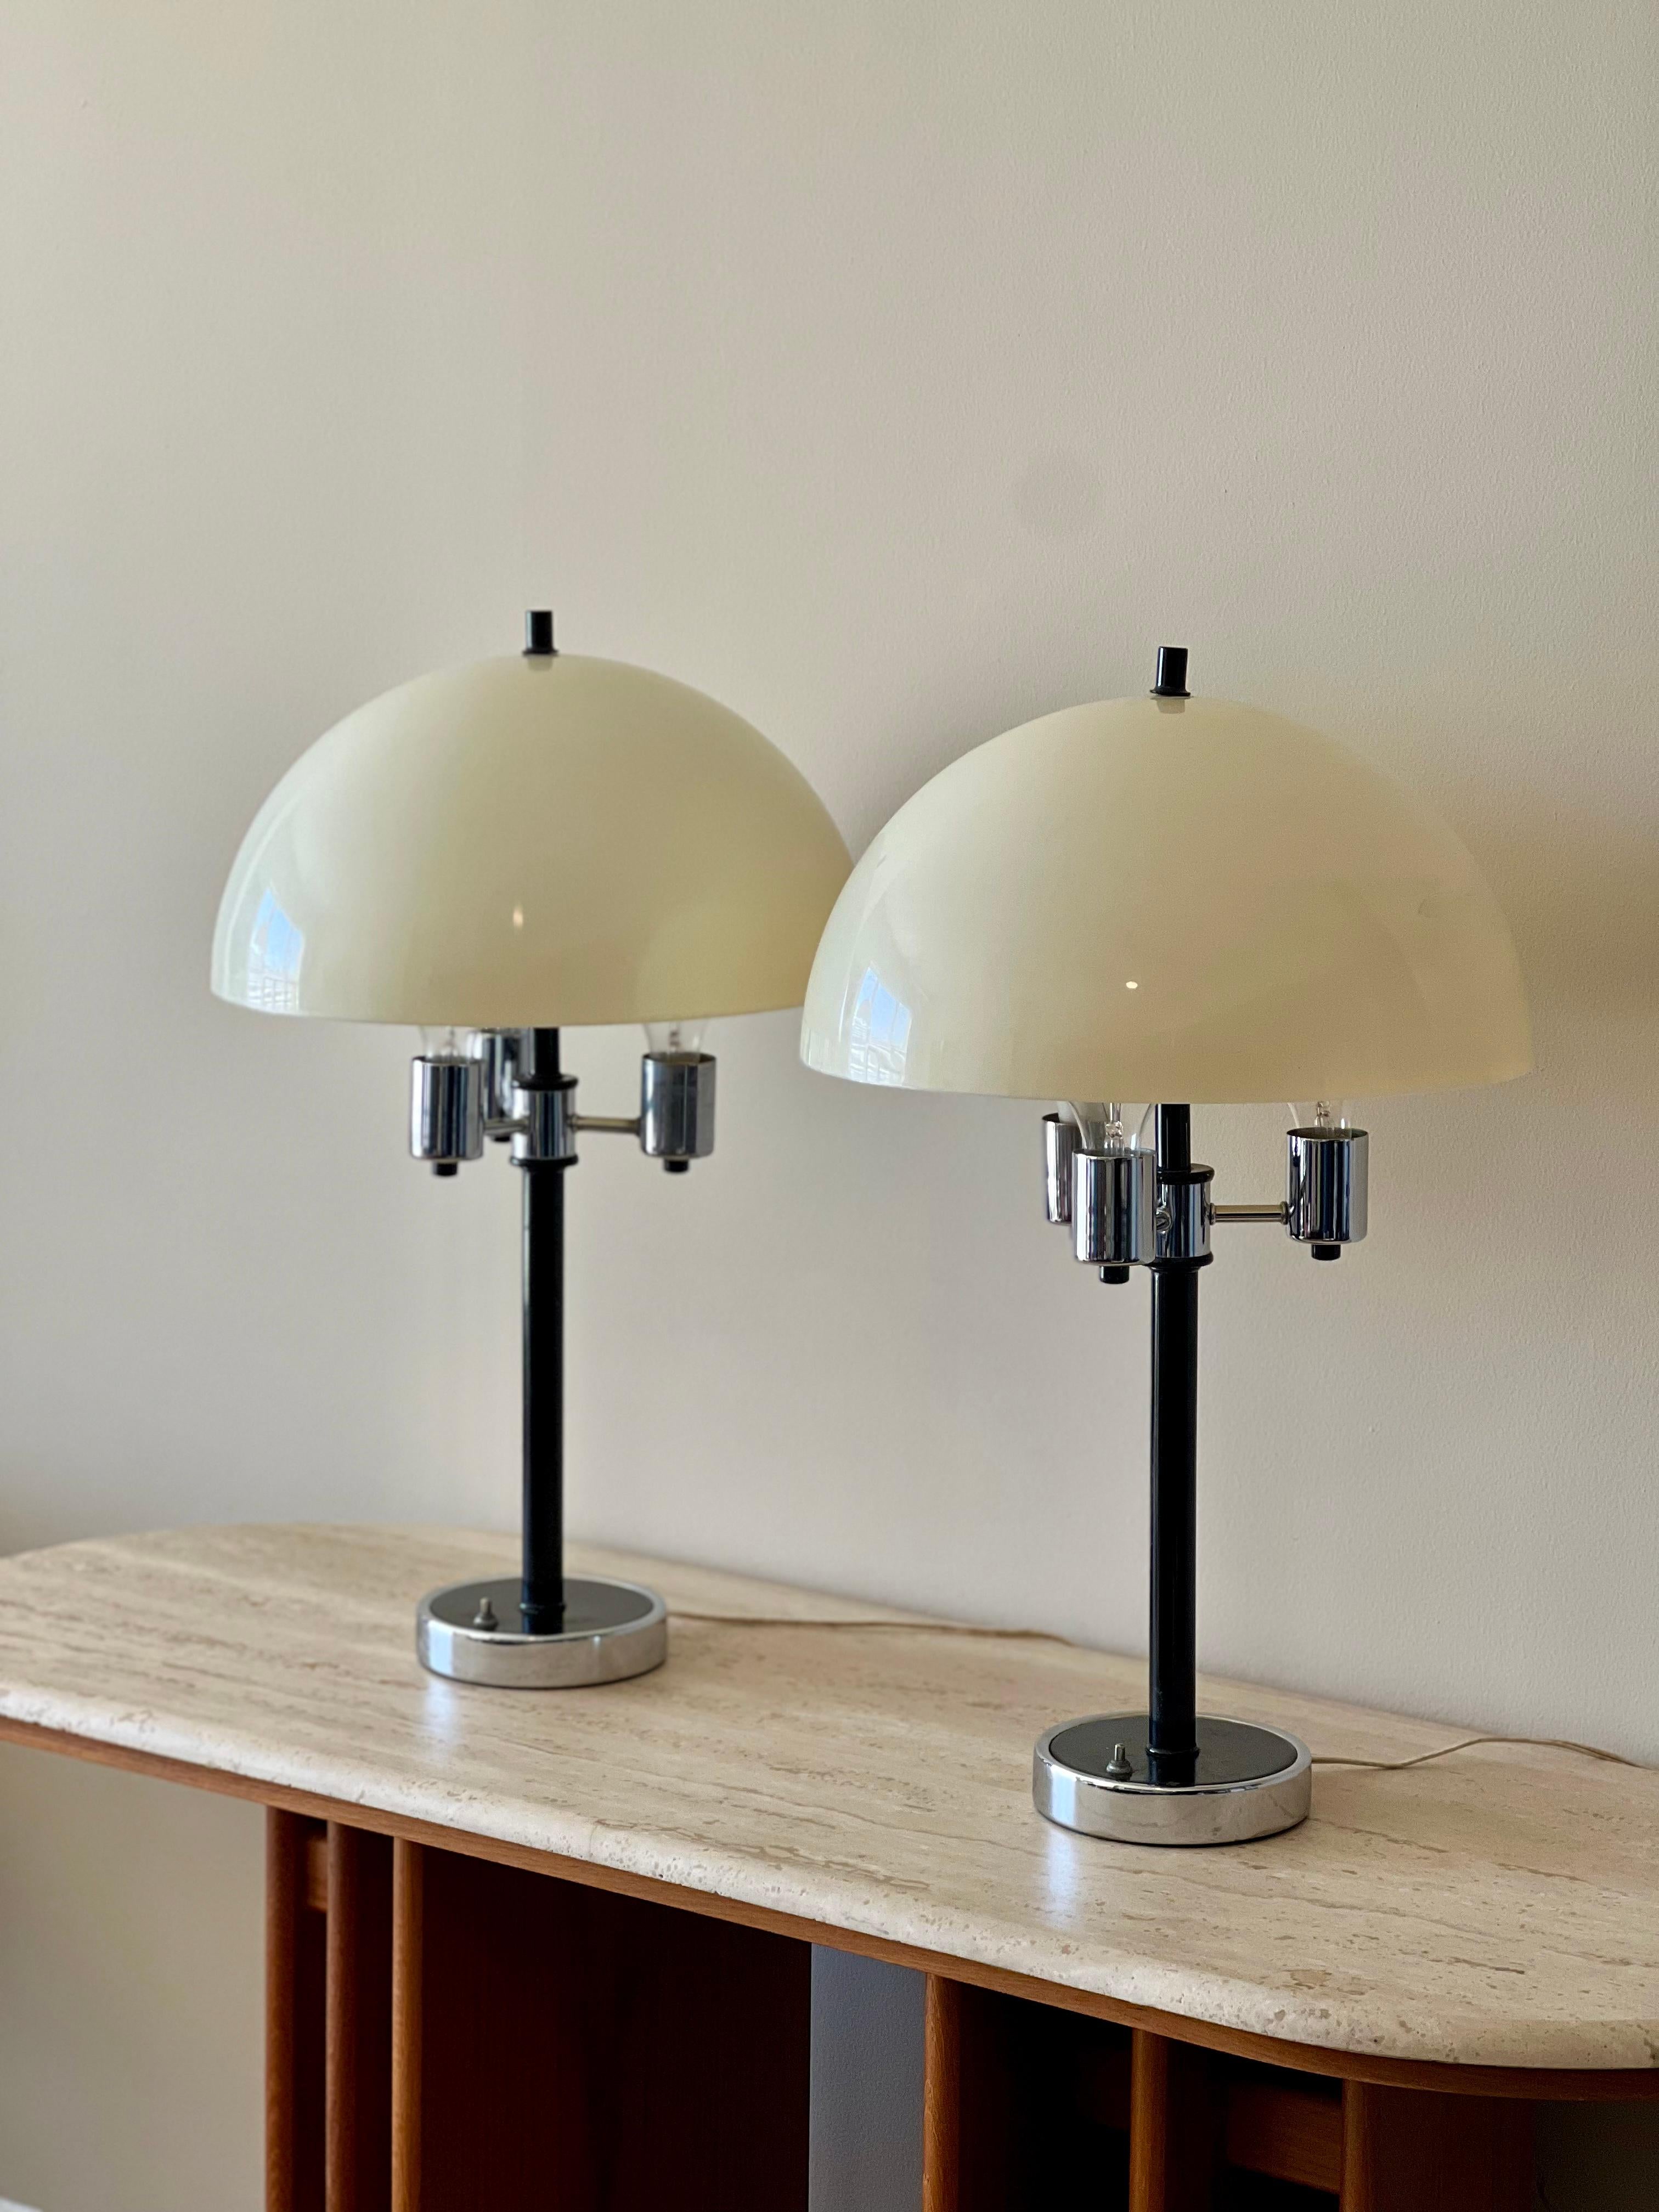 In the style of Verner Panton and Guzzini amongst many others. Beautiful cream acrylic shades and chrome bases. Nice vintage condition with a some scuffing and chipping to the base.